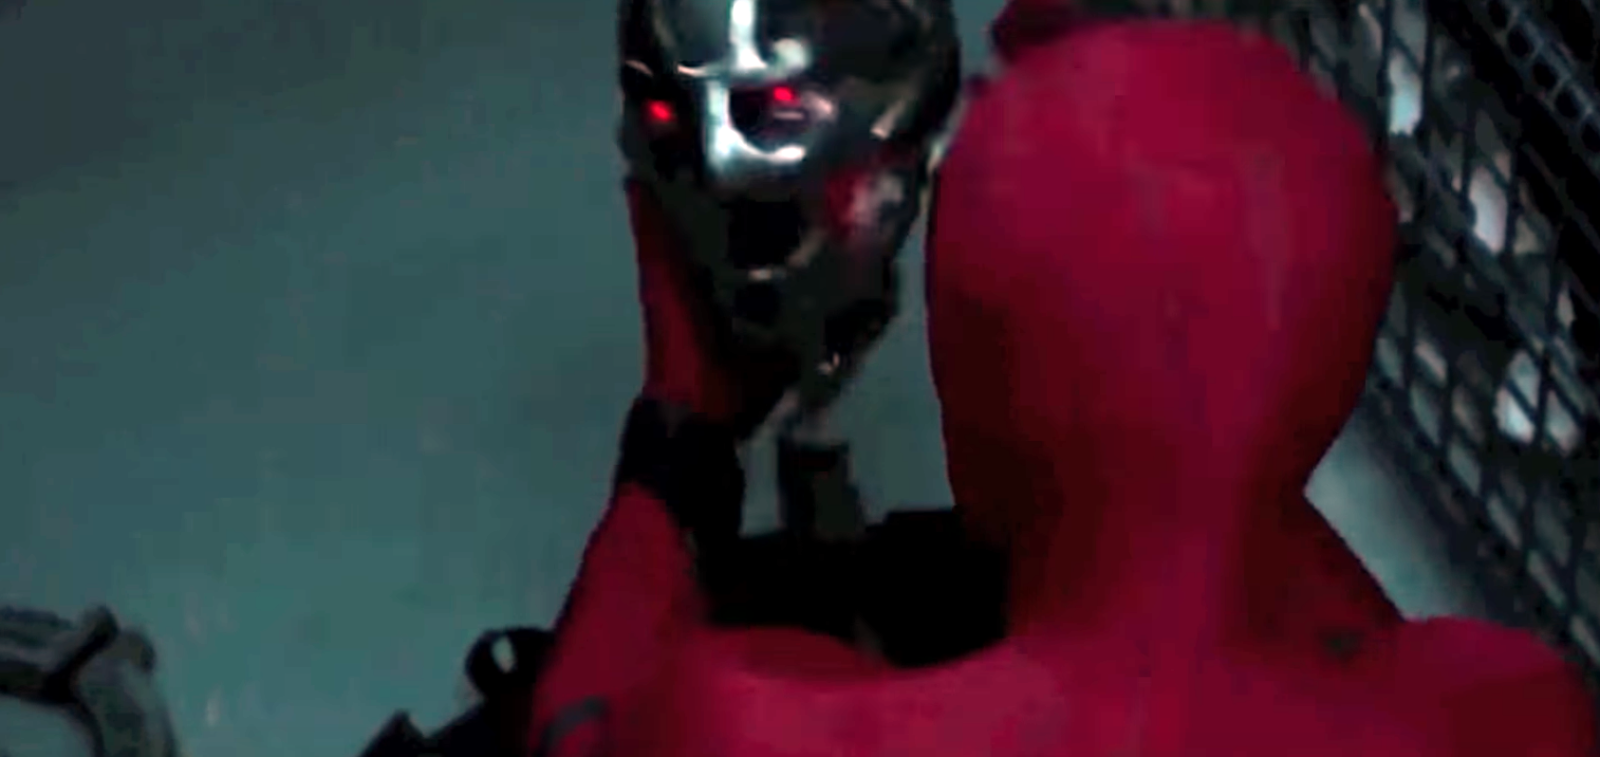 Is Ultron still alive?